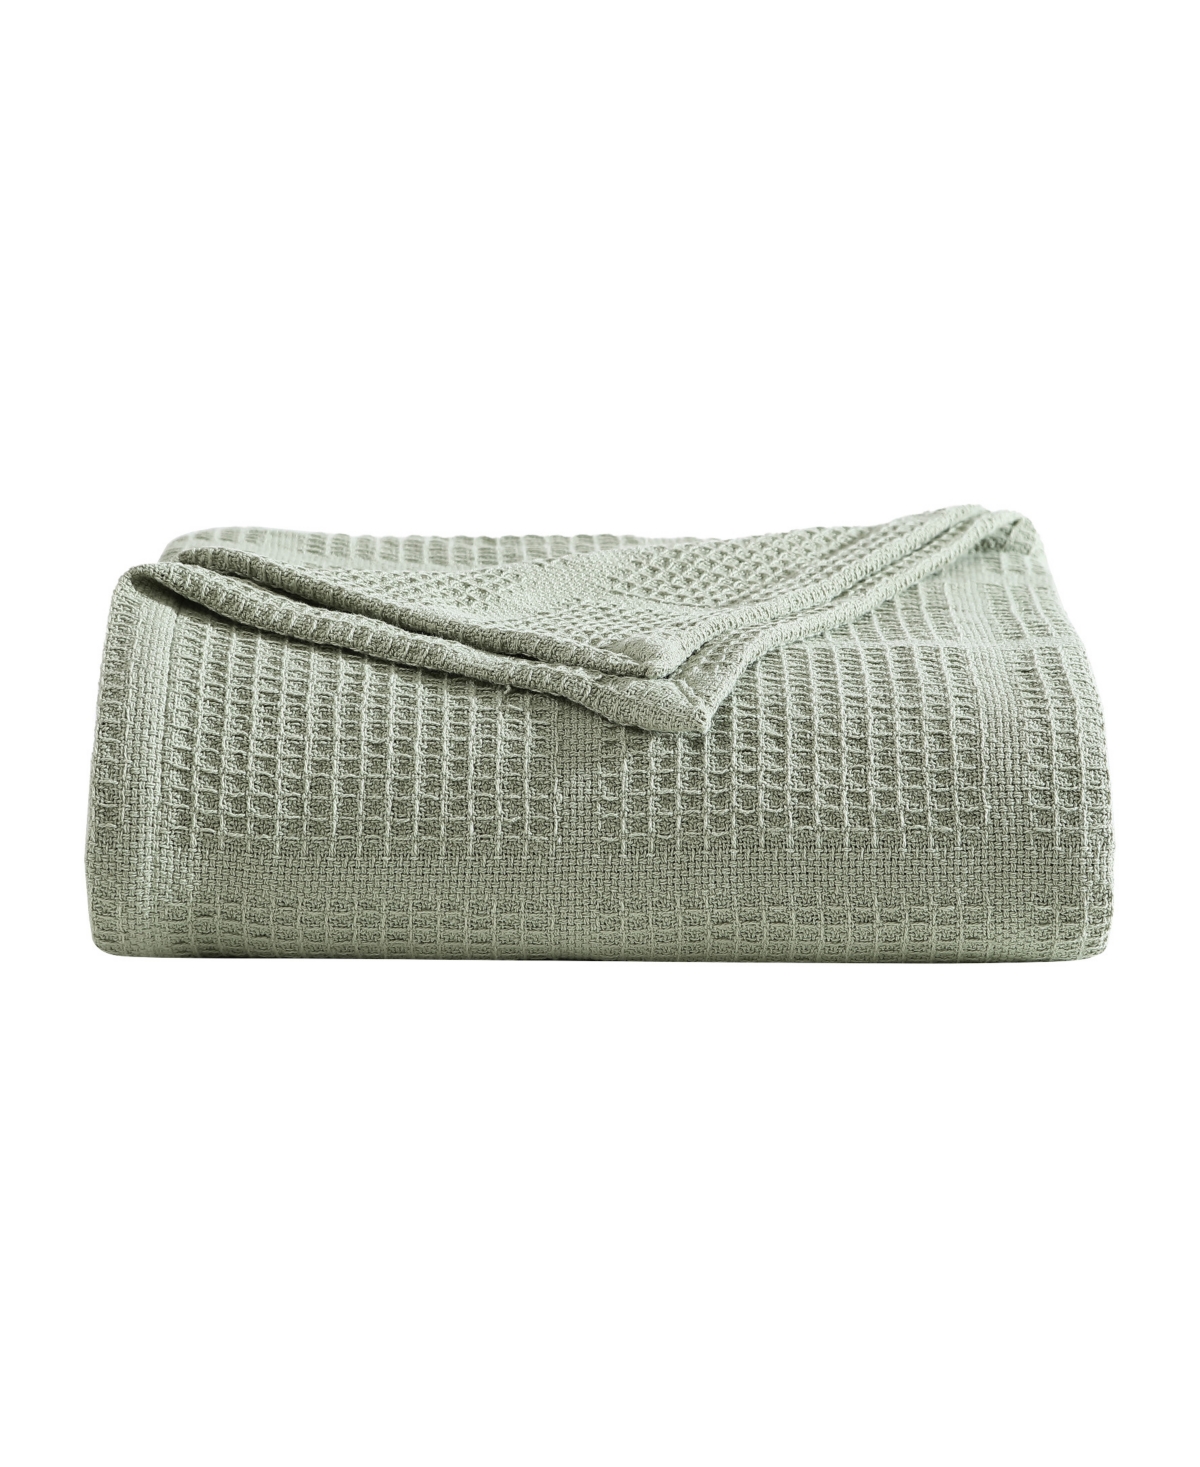 Kenneth Cole New York Essentials Waffle Grid Cotton Dobby Blanket, Full/queen In Sage Green